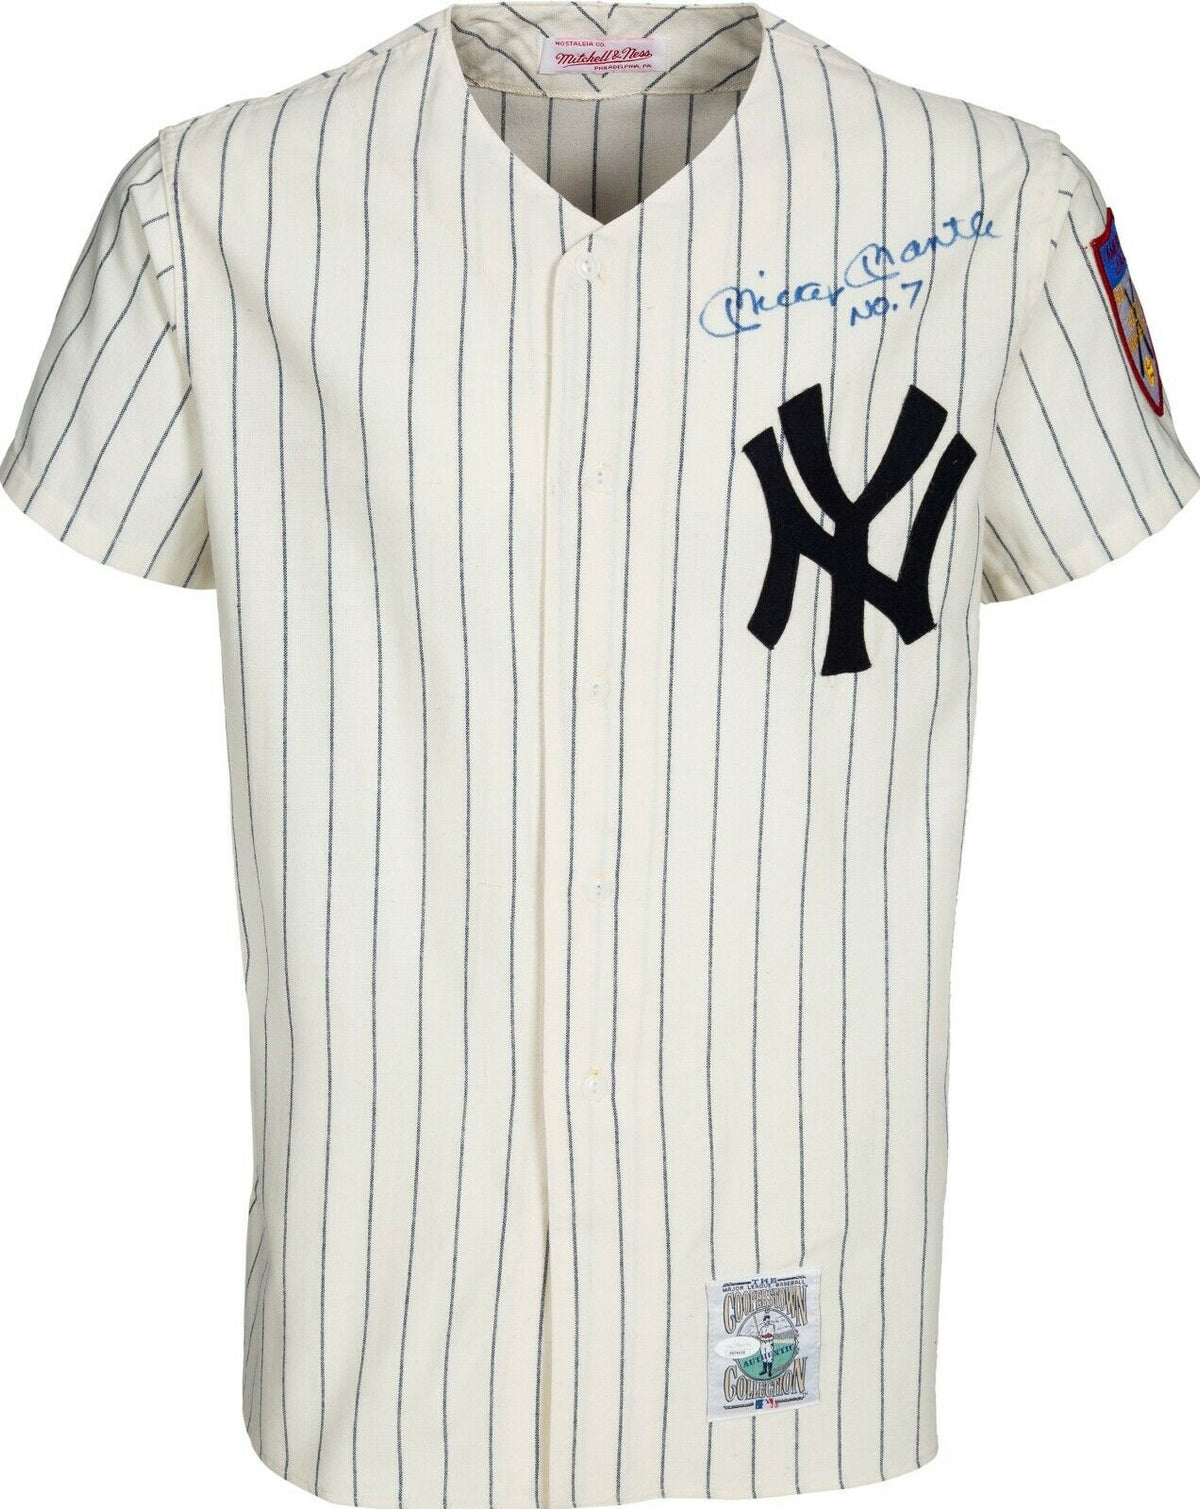 Mickey Mantle #7 signed Replica 1951 Rookie Jersey Vintage Official Yankees  Mickey Mantle Gold Pin.